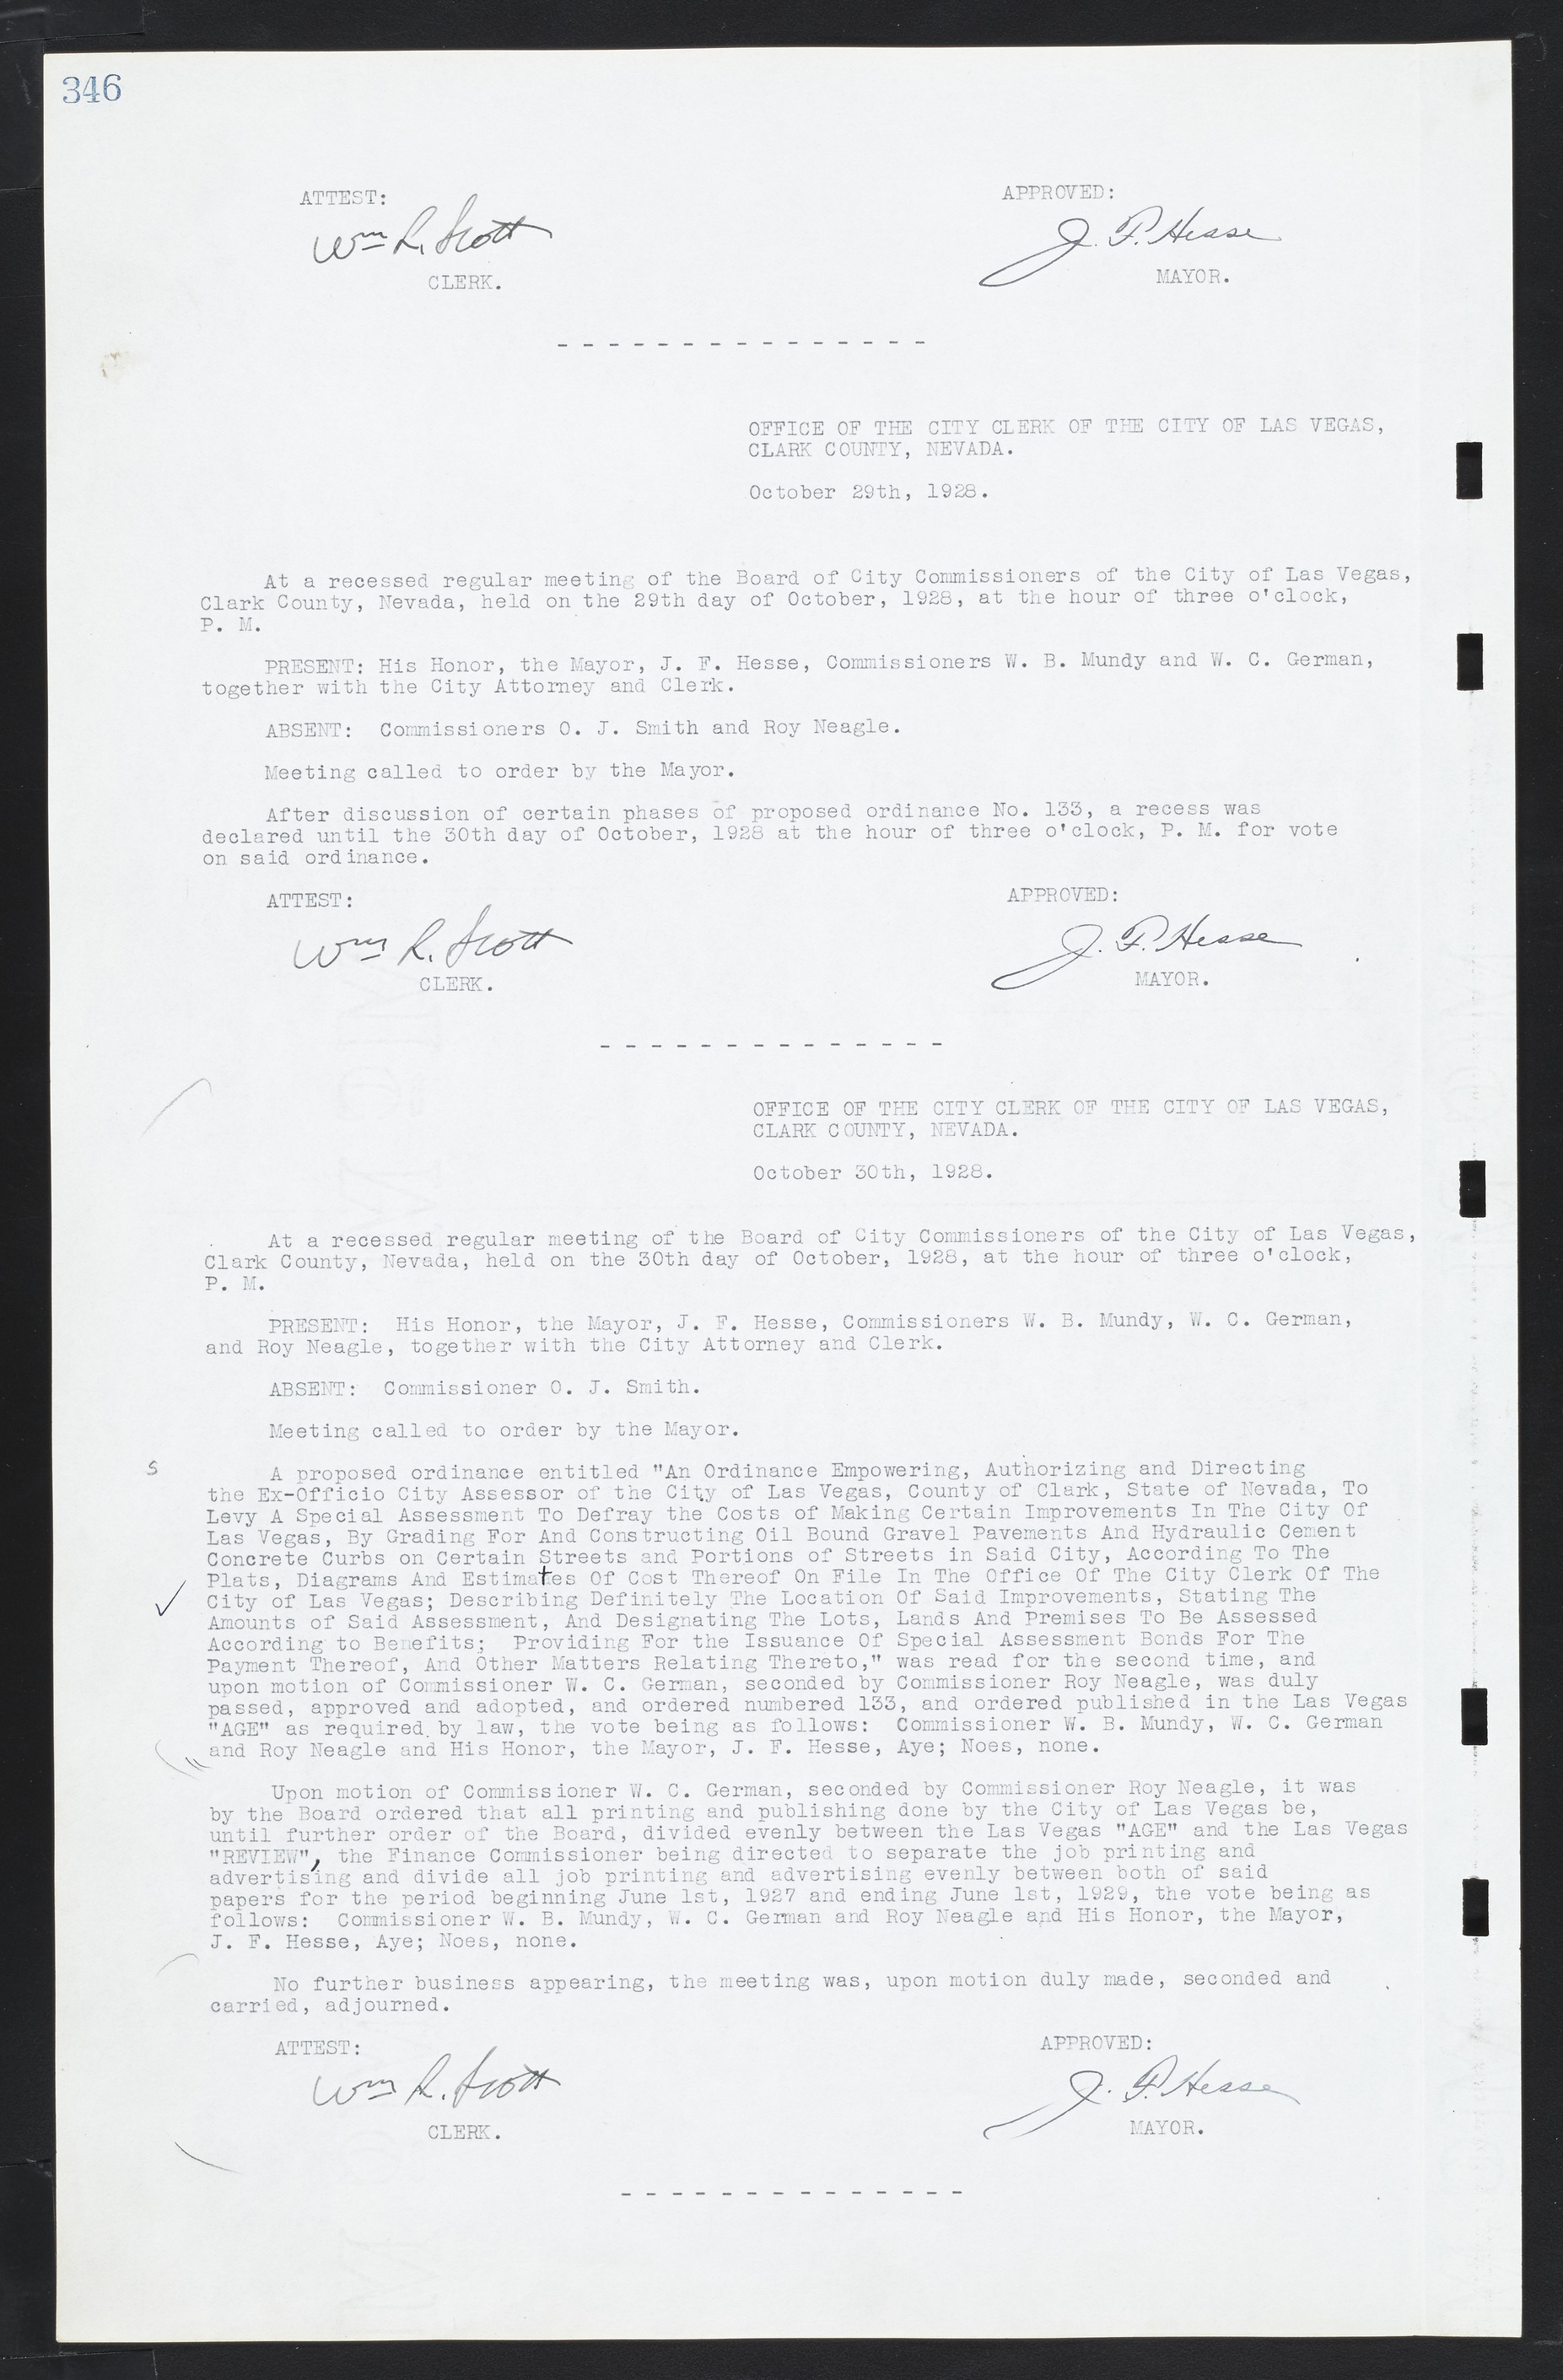 Las Vegas City Commission Minutes, March 1, 1922 to May 10, 1929, lvc000002-355